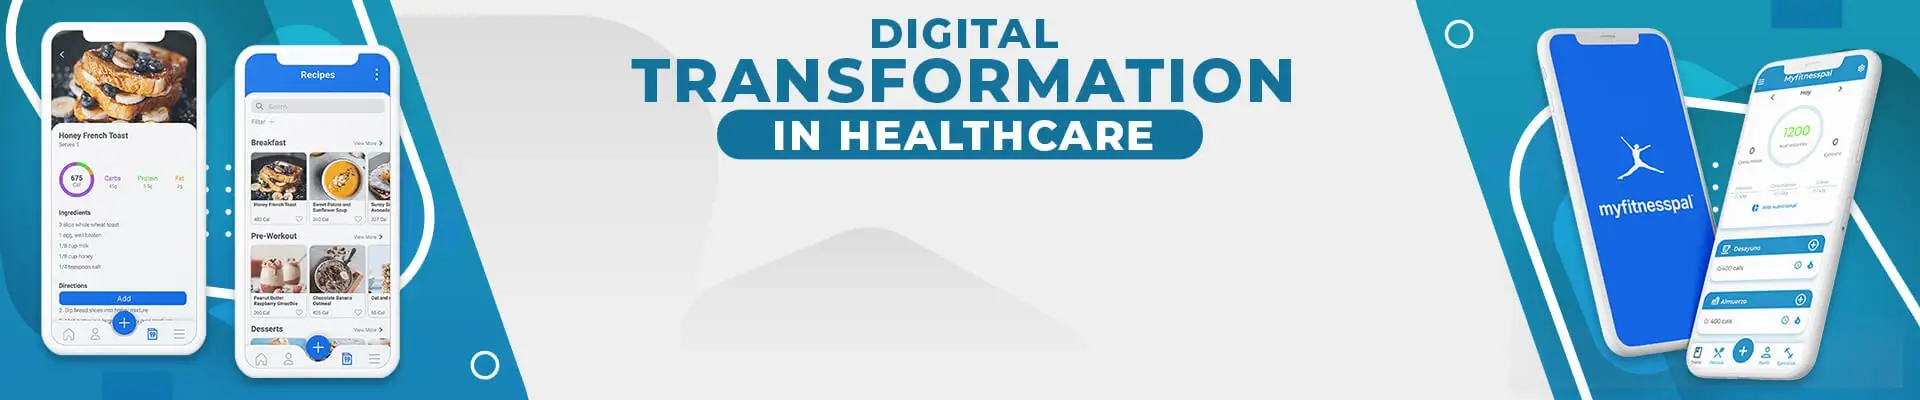 Digital Transformation in Healthcare 2021-2022: Trends, Challenges & Solutions